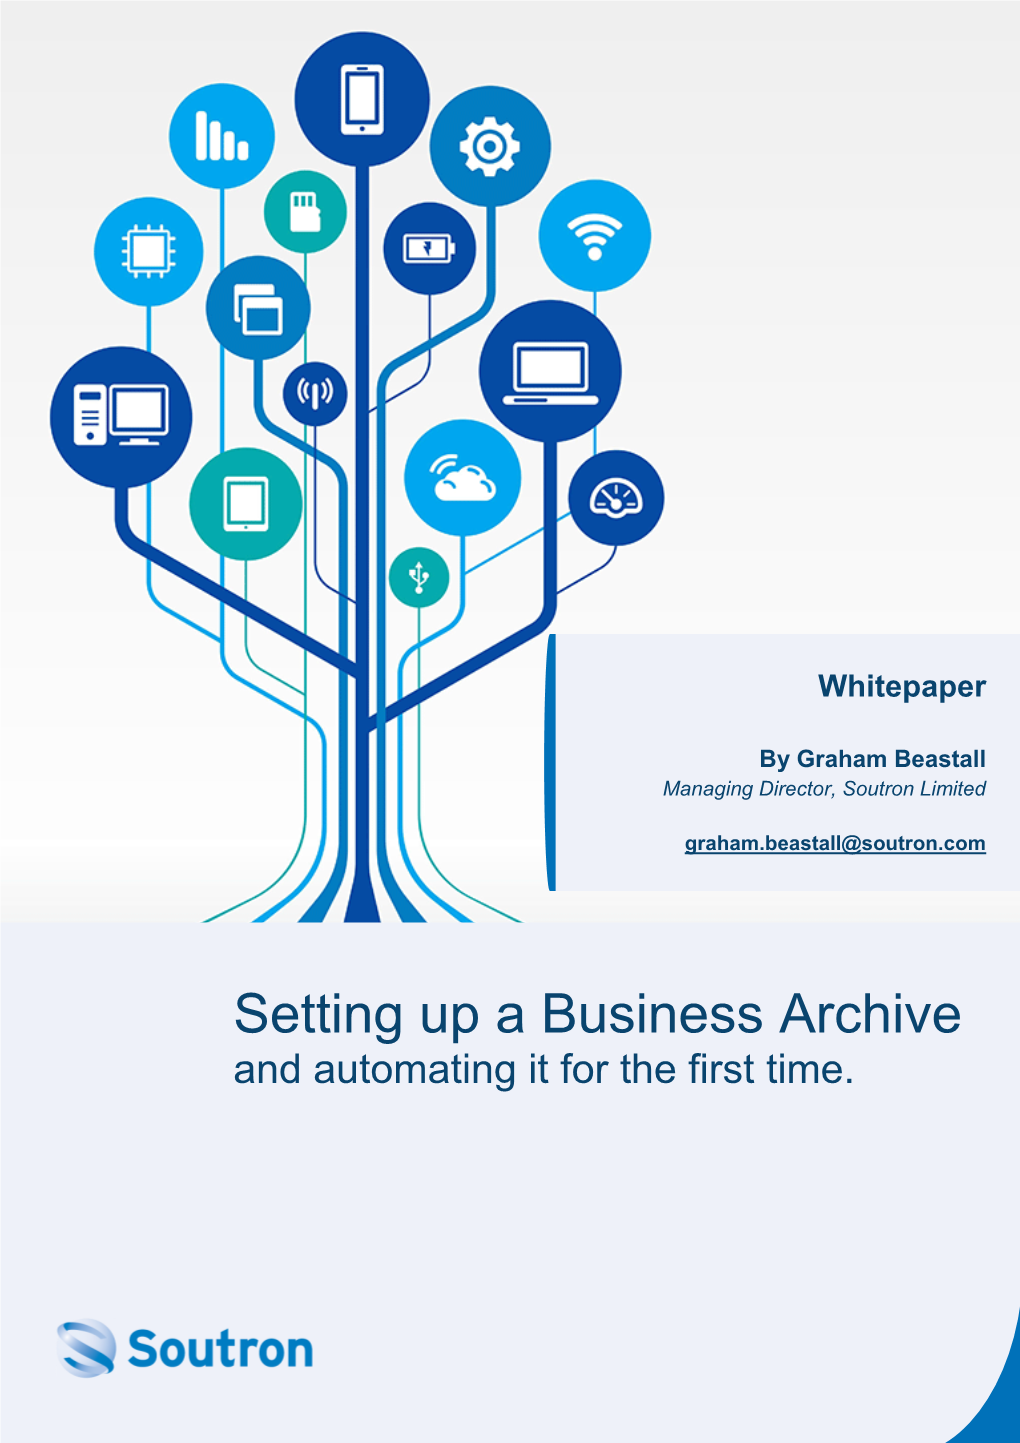 Setting up a Business Archive and Automating It for the First Time